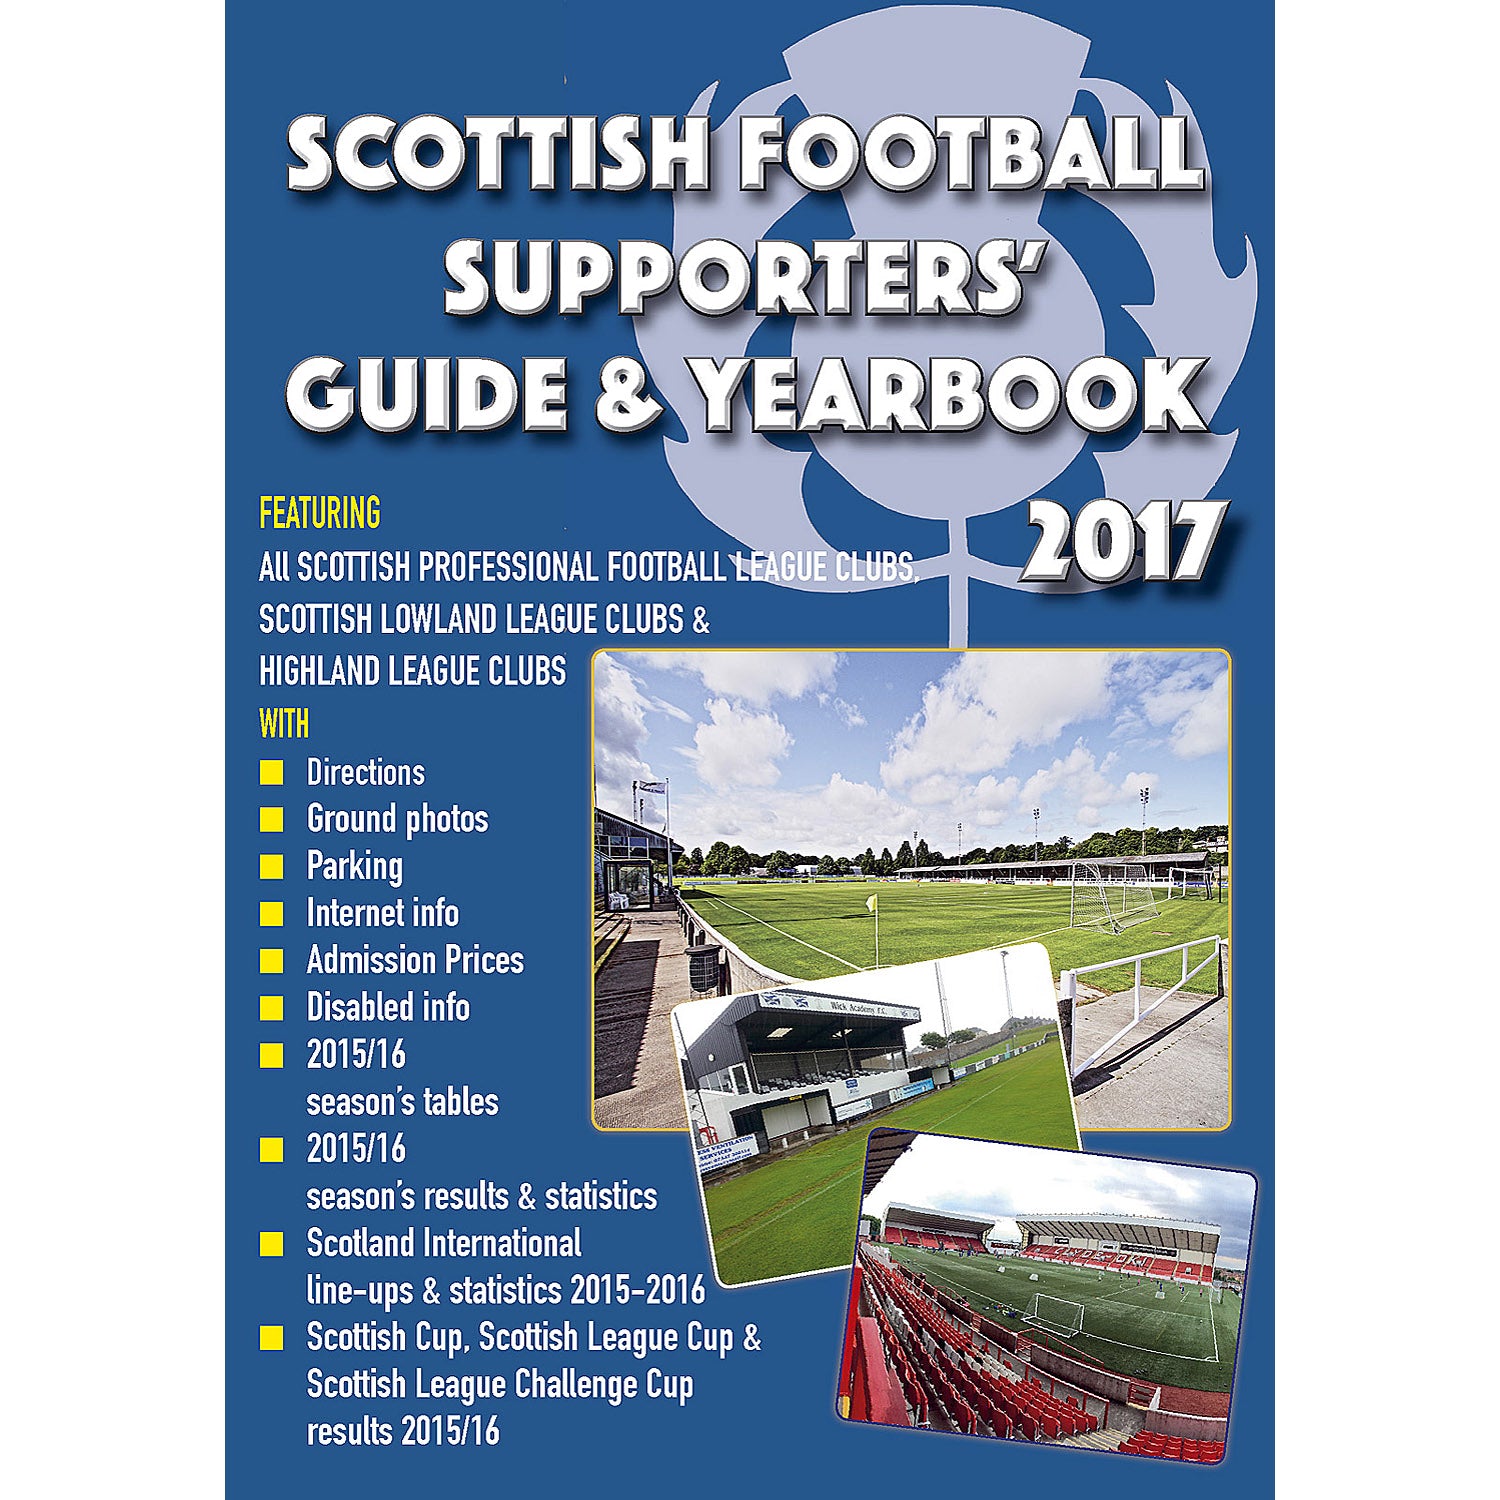 Scottish Football Supporters' Guide & Yearbook 2017